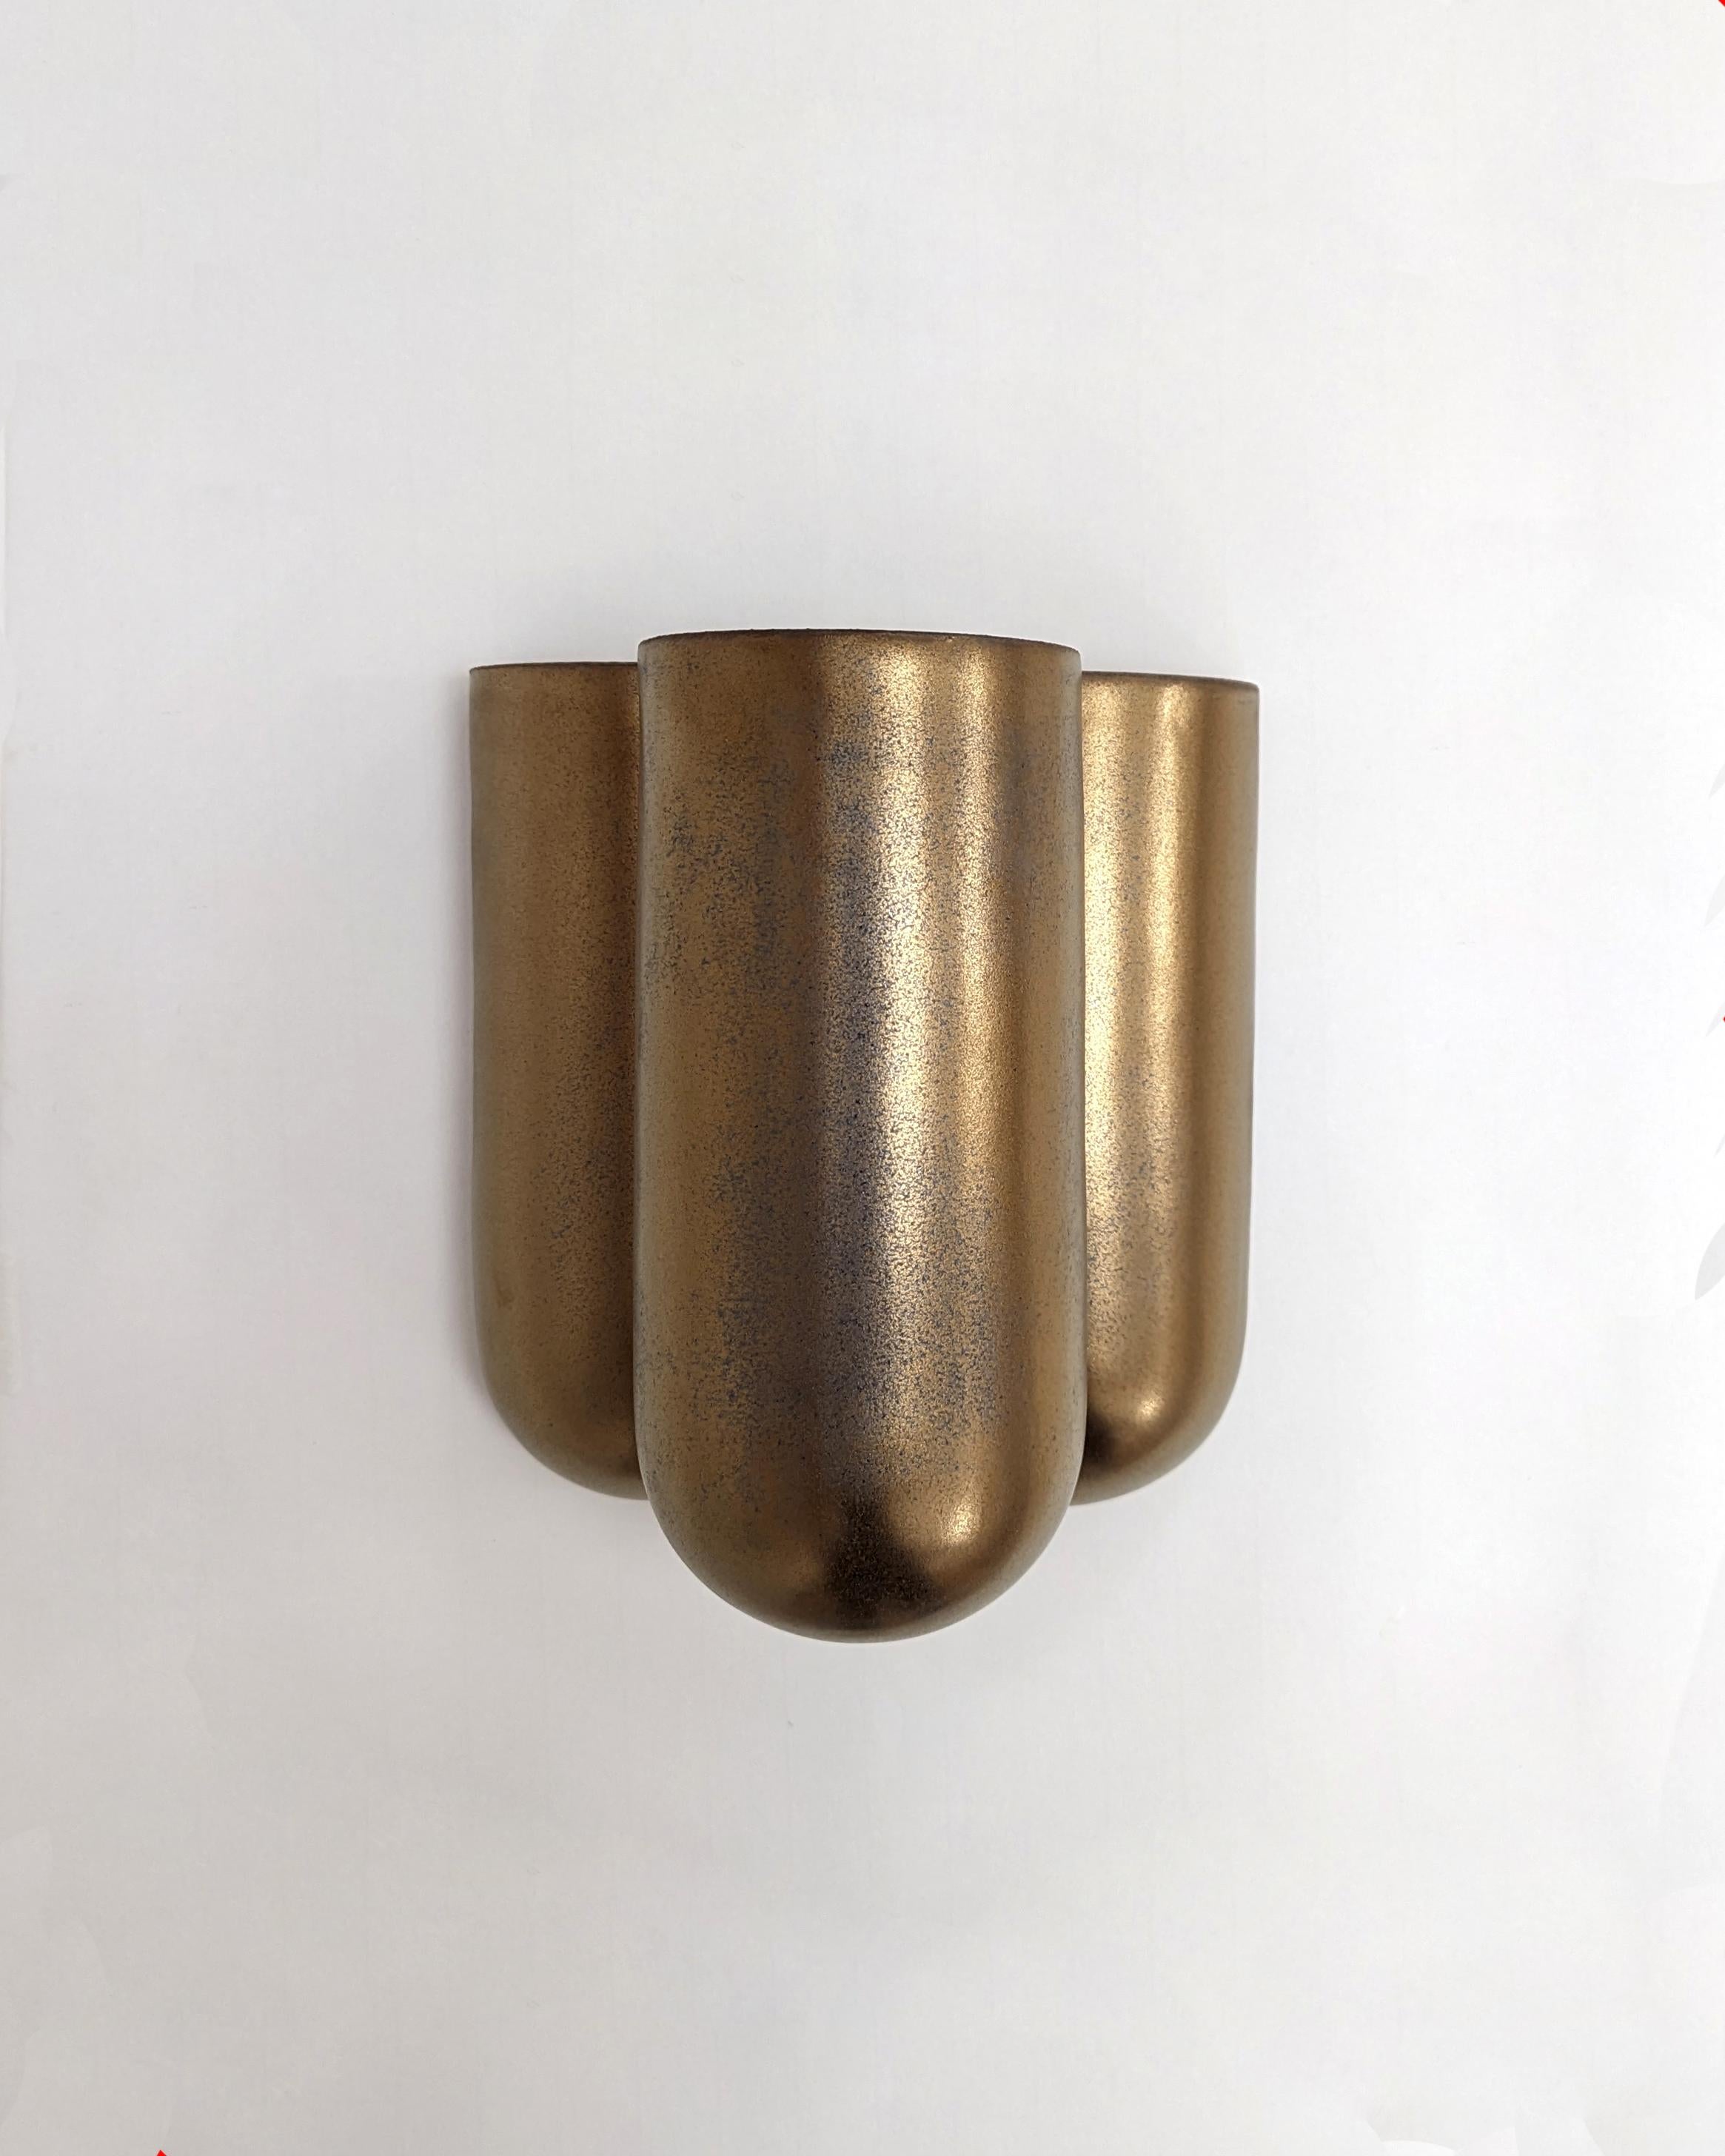 Blackened gold moor plus brillance wall light by Lisa Allegra
Dimensions: W 25.5 x D 24 x H 17 cm.
Materials: Clay.
Available in different finishes: Pearl, Dusty Rose, and Blackened Gold.

All our lamps can be wired according to each country.